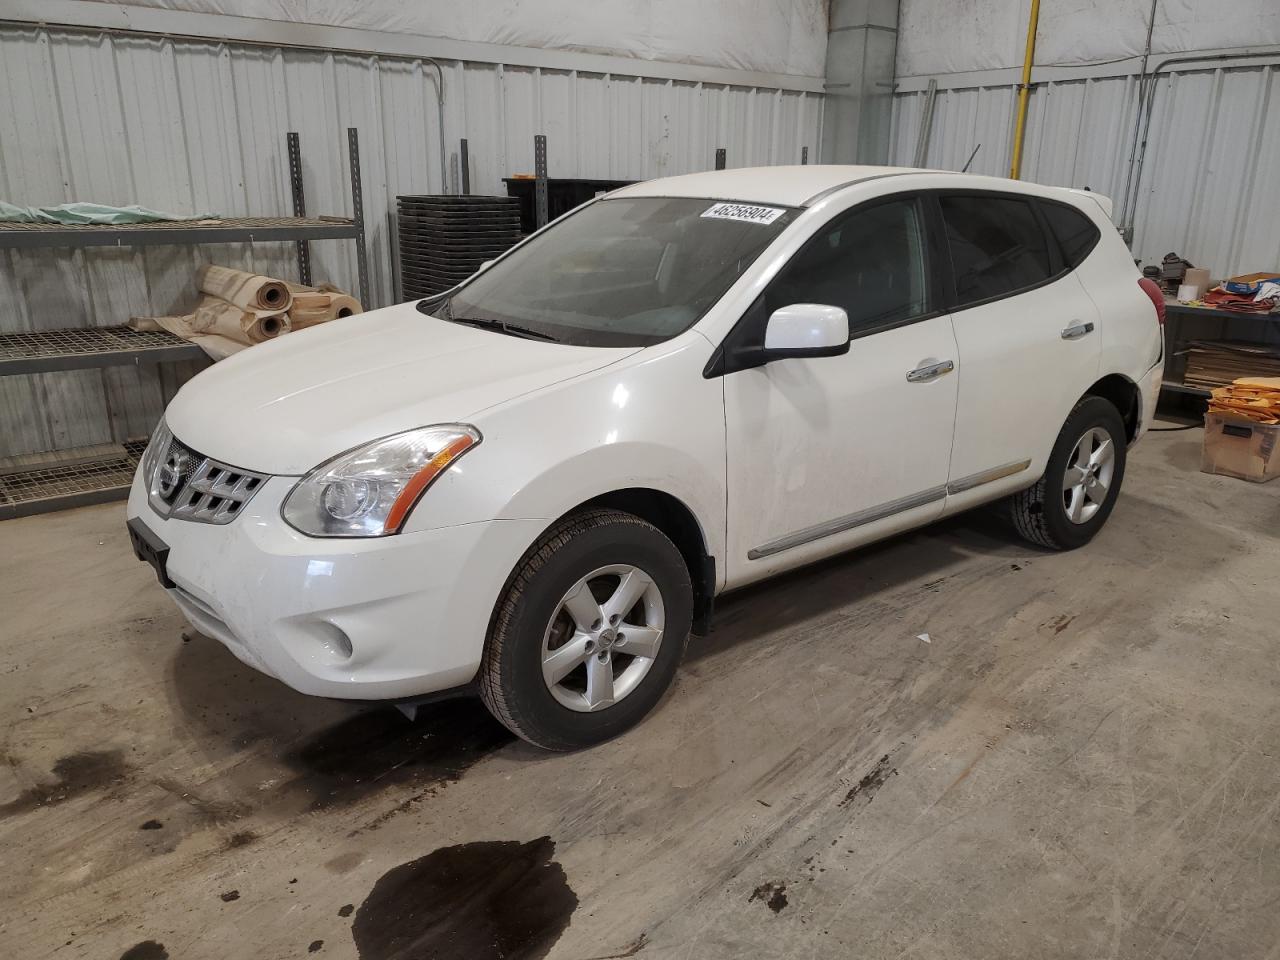 vin: JN8AS5MV8DW660845 JN8AS5MV8DW660845 2013 nissan rogue 2500 for Sale in 53224, Wi - Milwaukee North, Milwaukee, USA